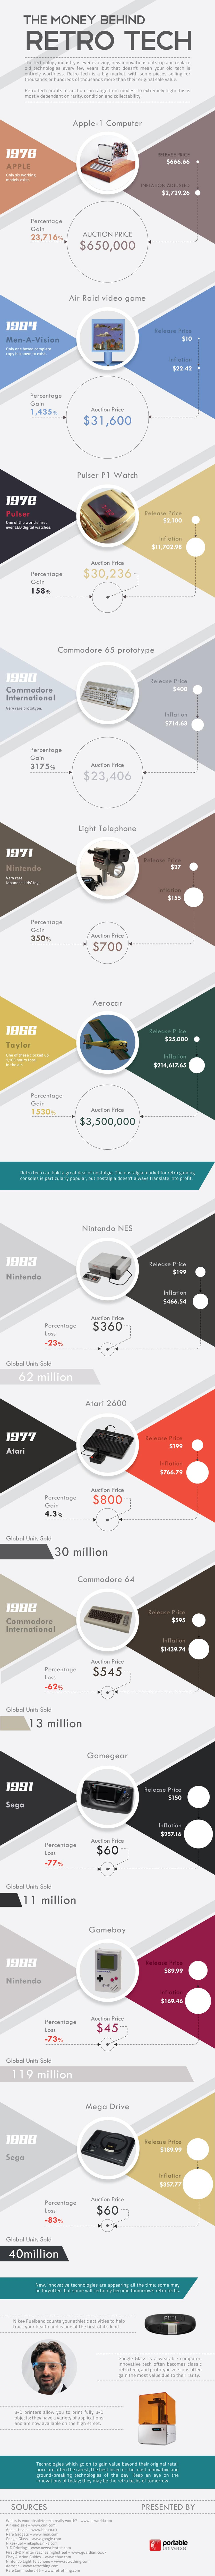 Retro Tech And What It’s Worth Today [Infographic]